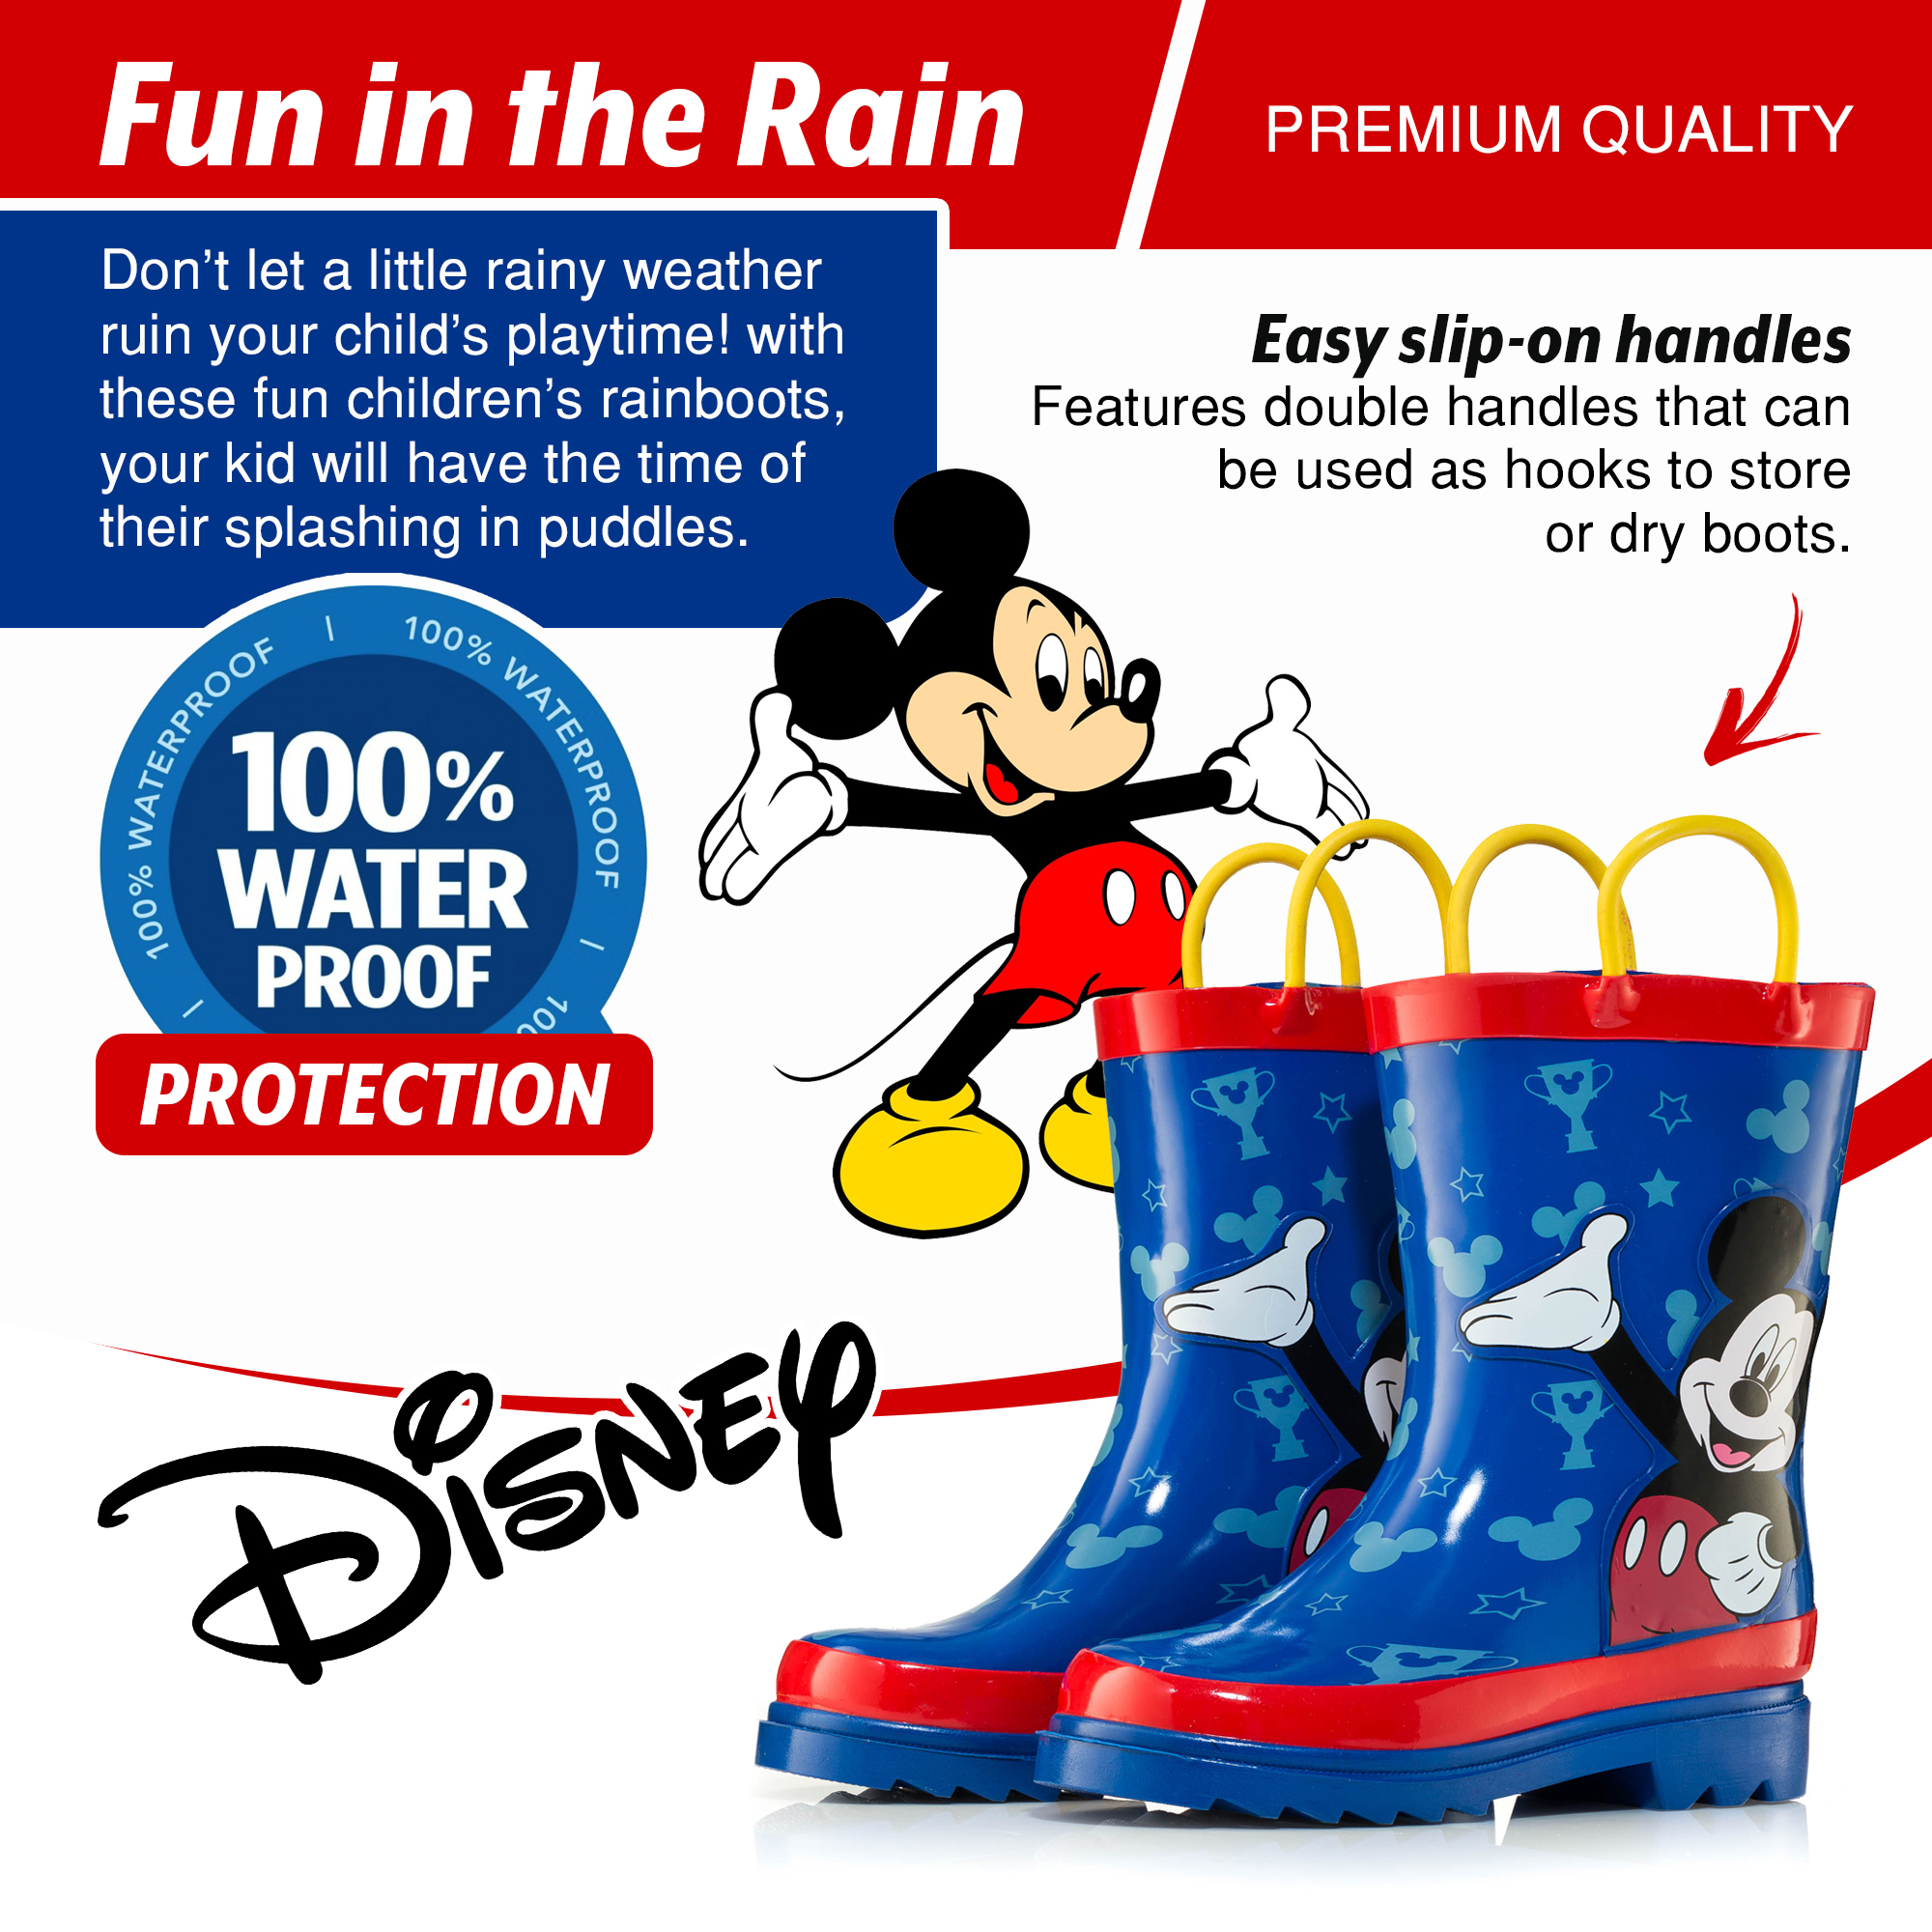 Disney Mickey Mouse Blue Rubber Rain Boots - Size 11 toddler - image 2 of 6